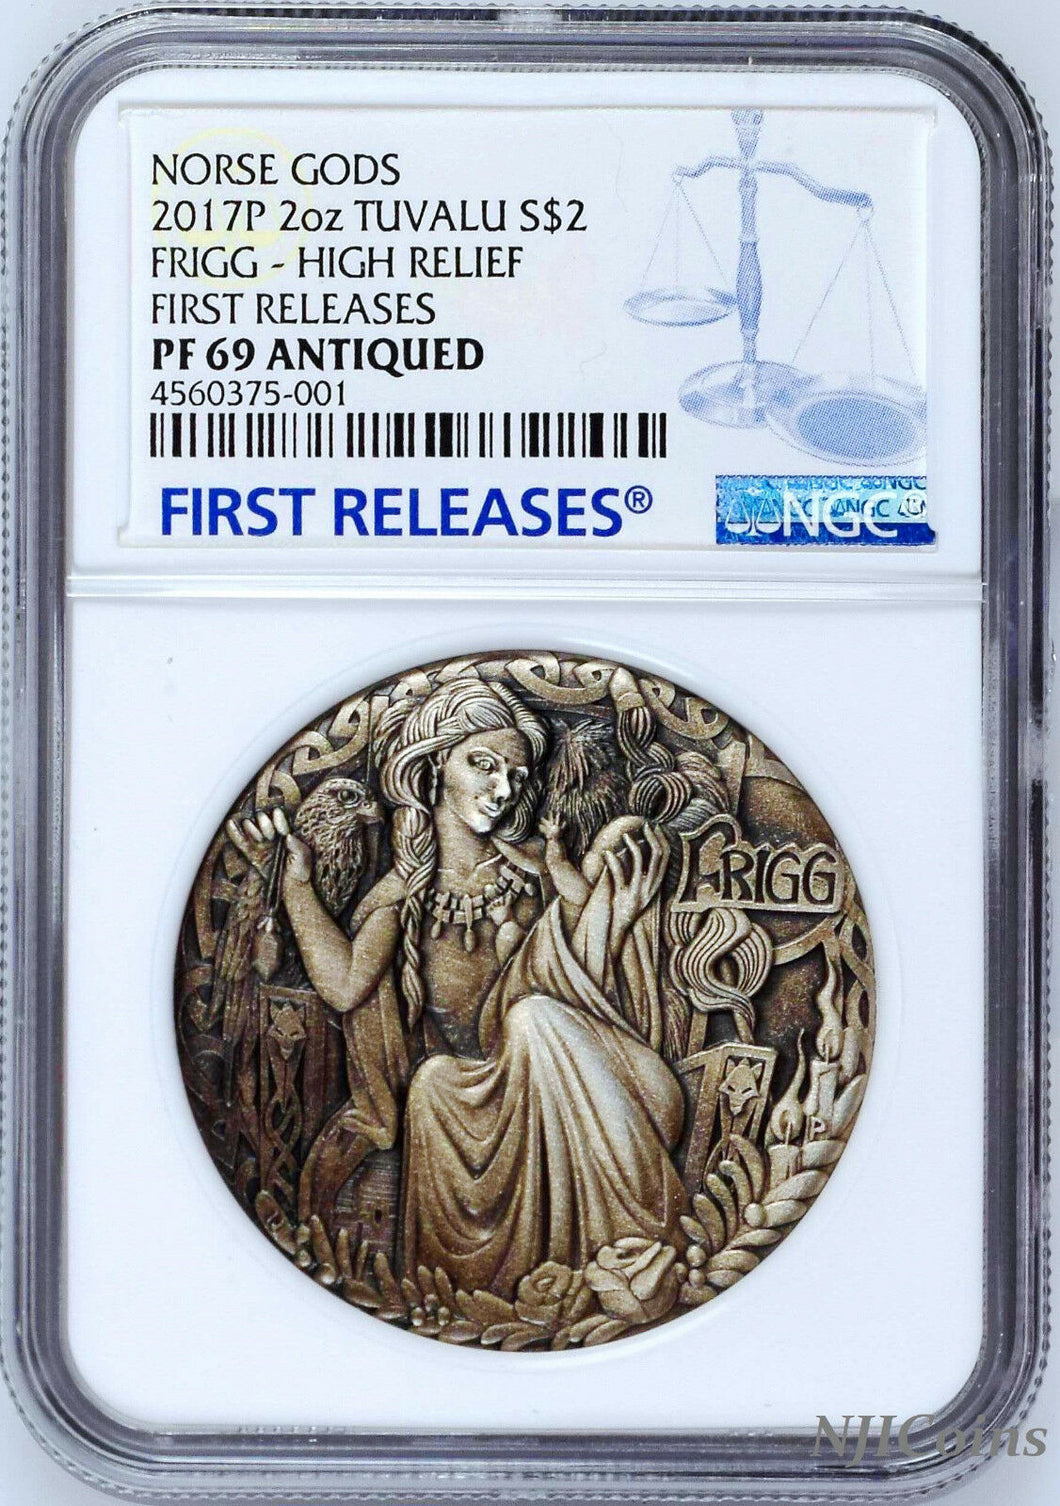 2017 P Norse Goddesses Frigg HIGH RELIEF ANTIQUED 2Oz Silver $2 COIN NGC PF69 FR